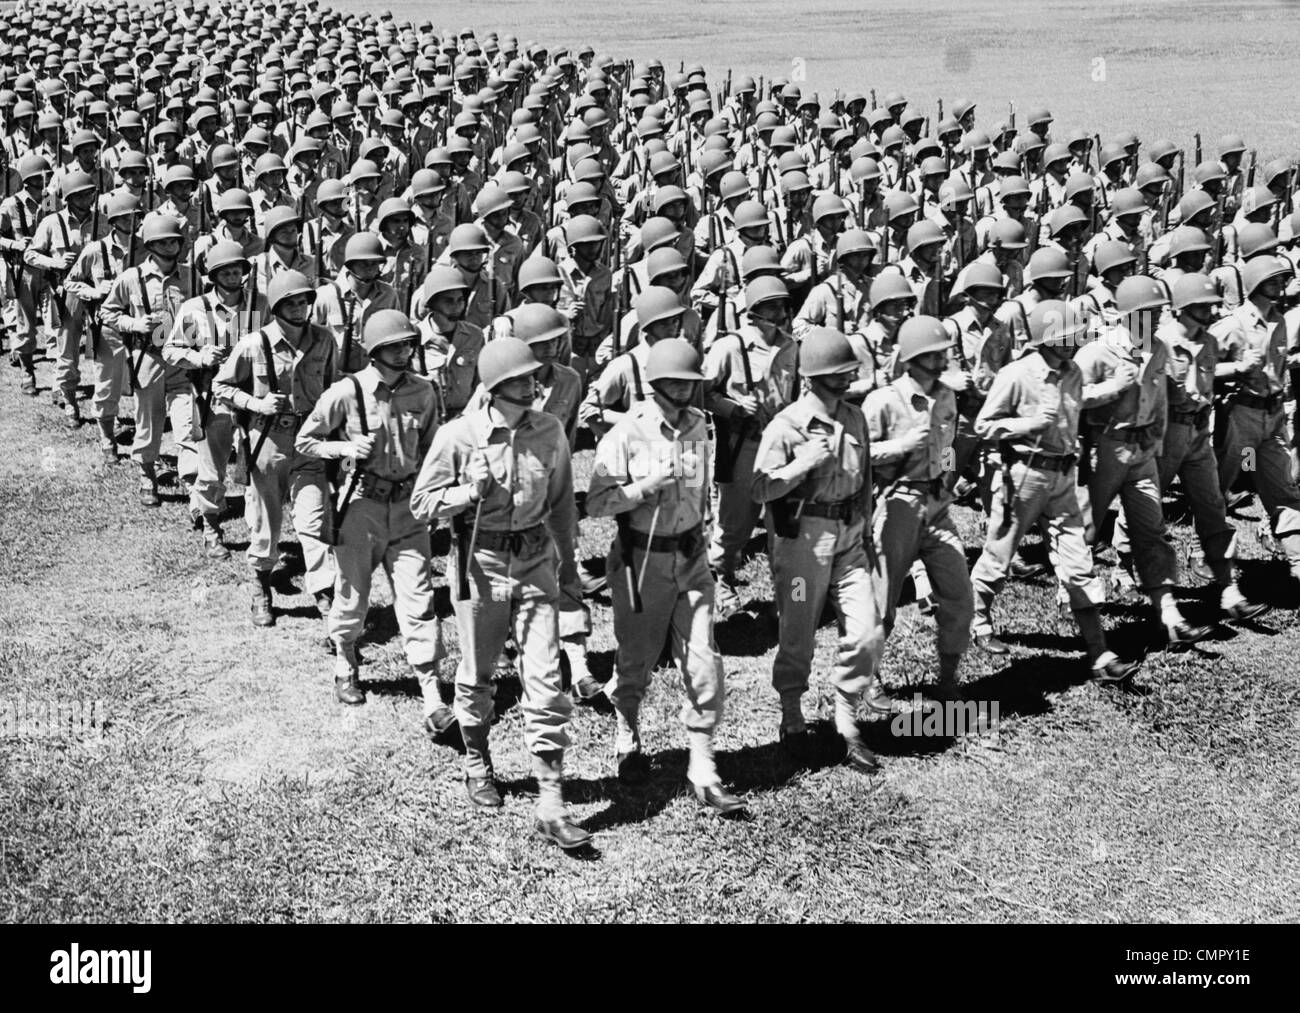 1940s ROWS OF USA INFANTRYMEN MARCHING Stock Photo